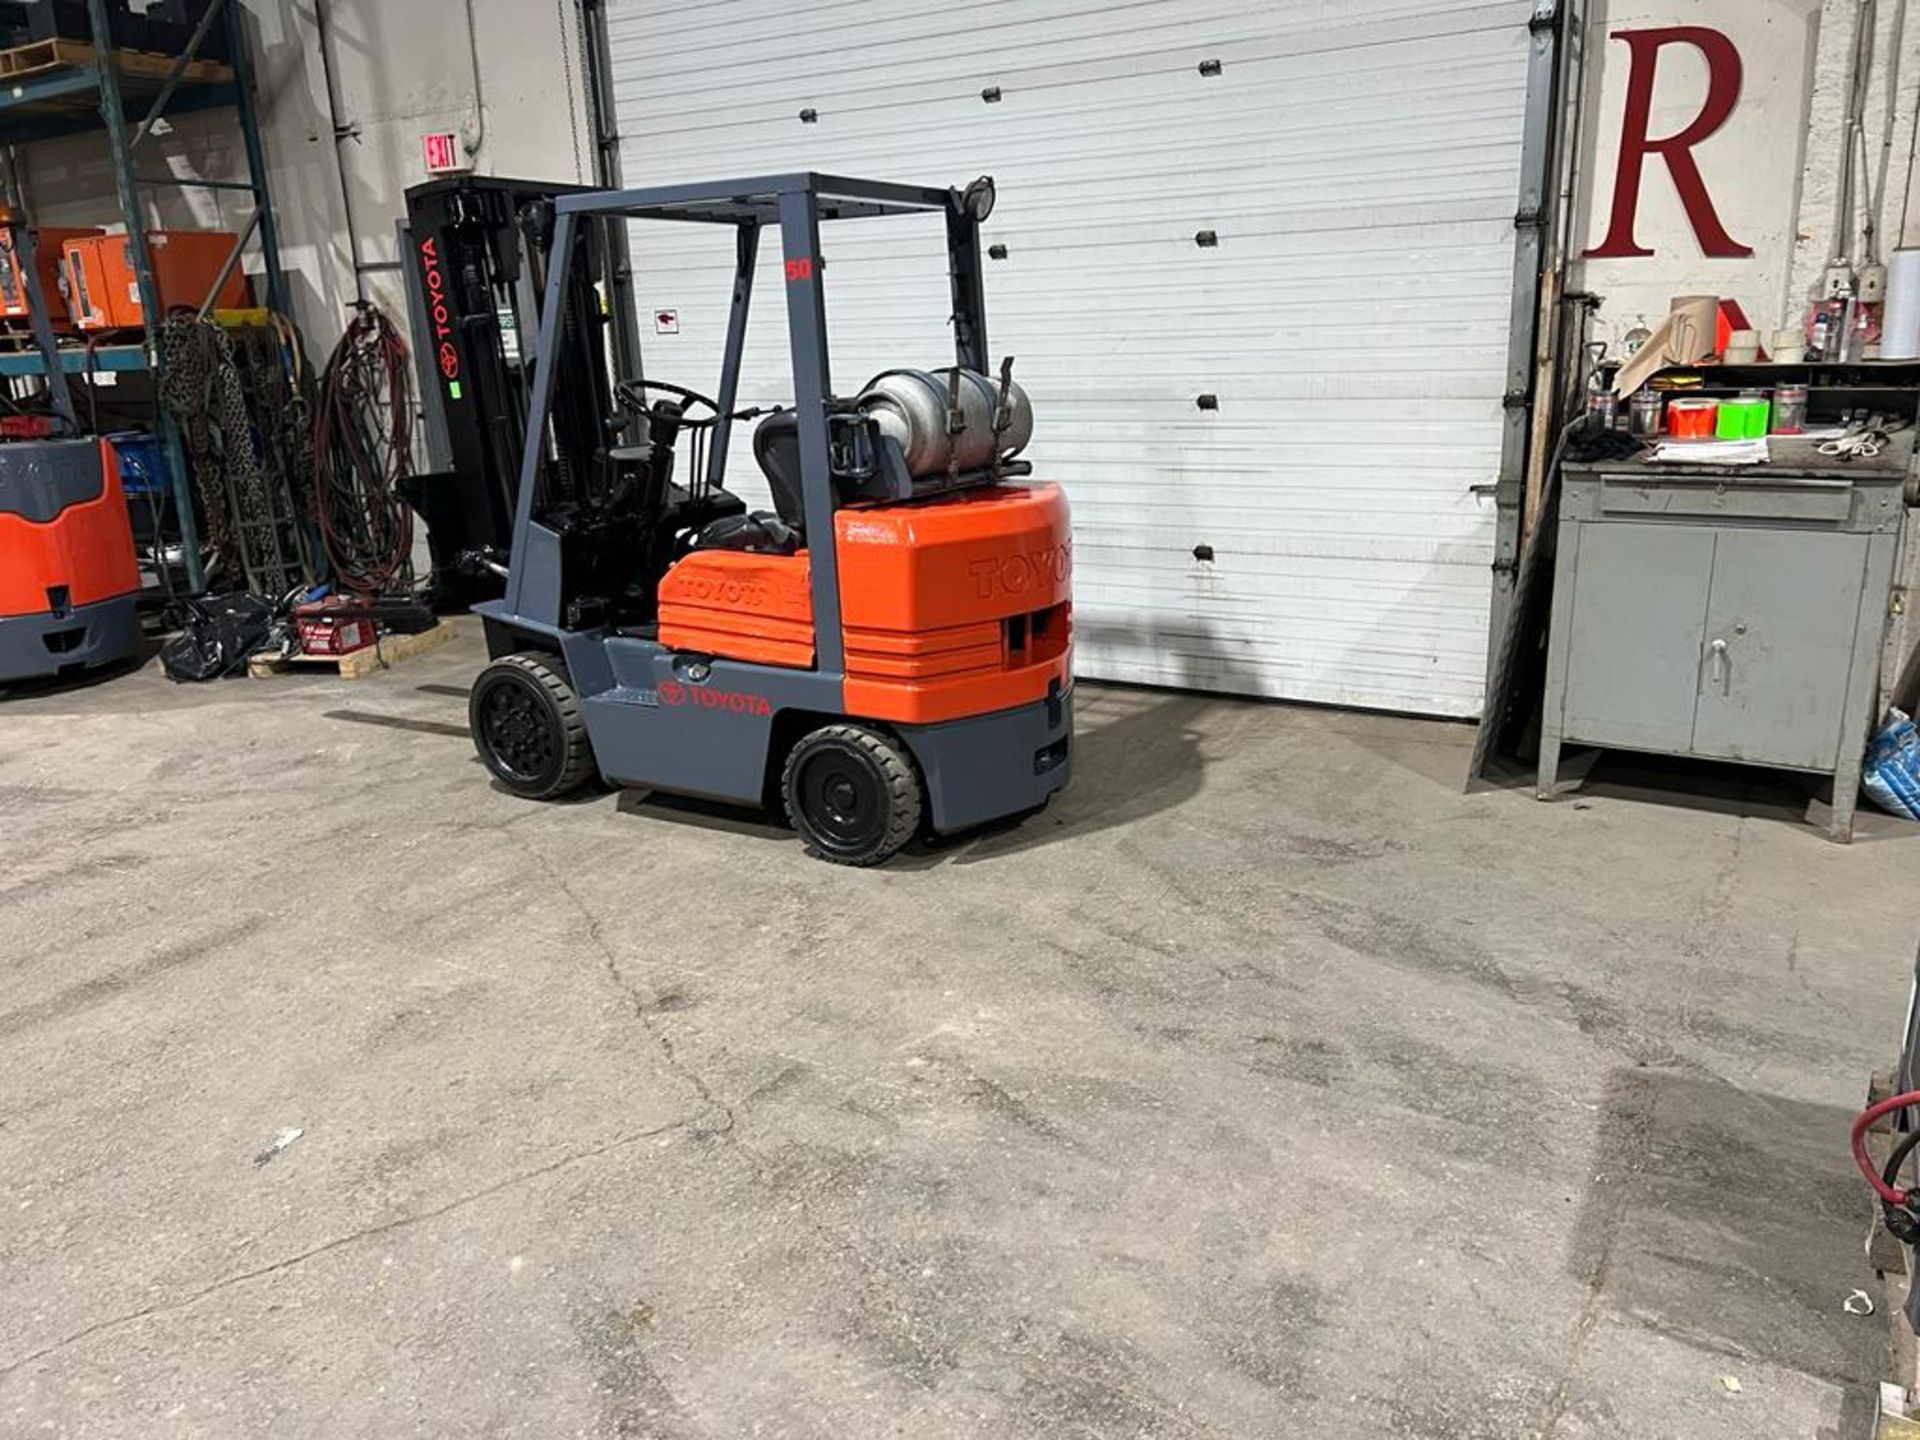 Toyota 5,000lbs Capacity OUTDOOR Forklift LPG (propane) with Sideshift and 3-stage Mast - (no - Image 4 of 4